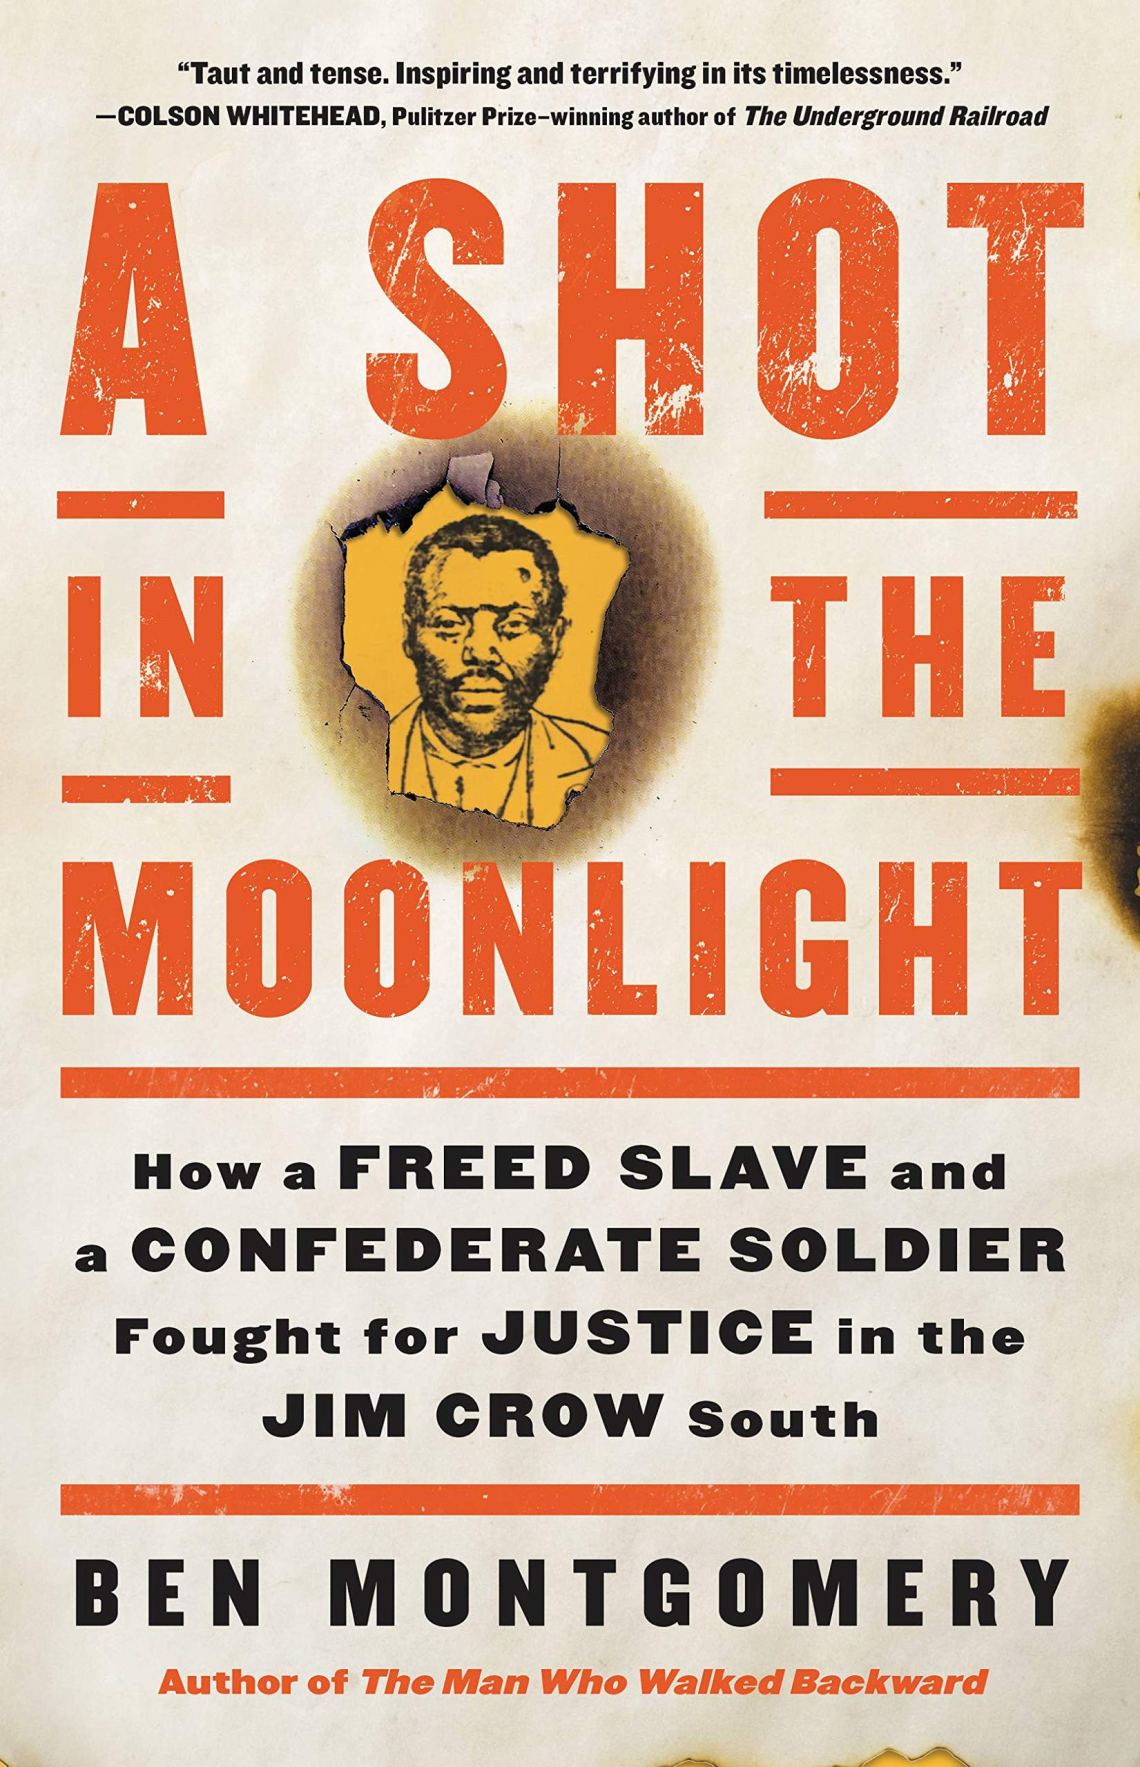 Image of book, A Shot in the Moonlight: How a Freed Slave and a Confederate Soldier Fought for Justice in the Jim Crow South 
by Ben Montgomery